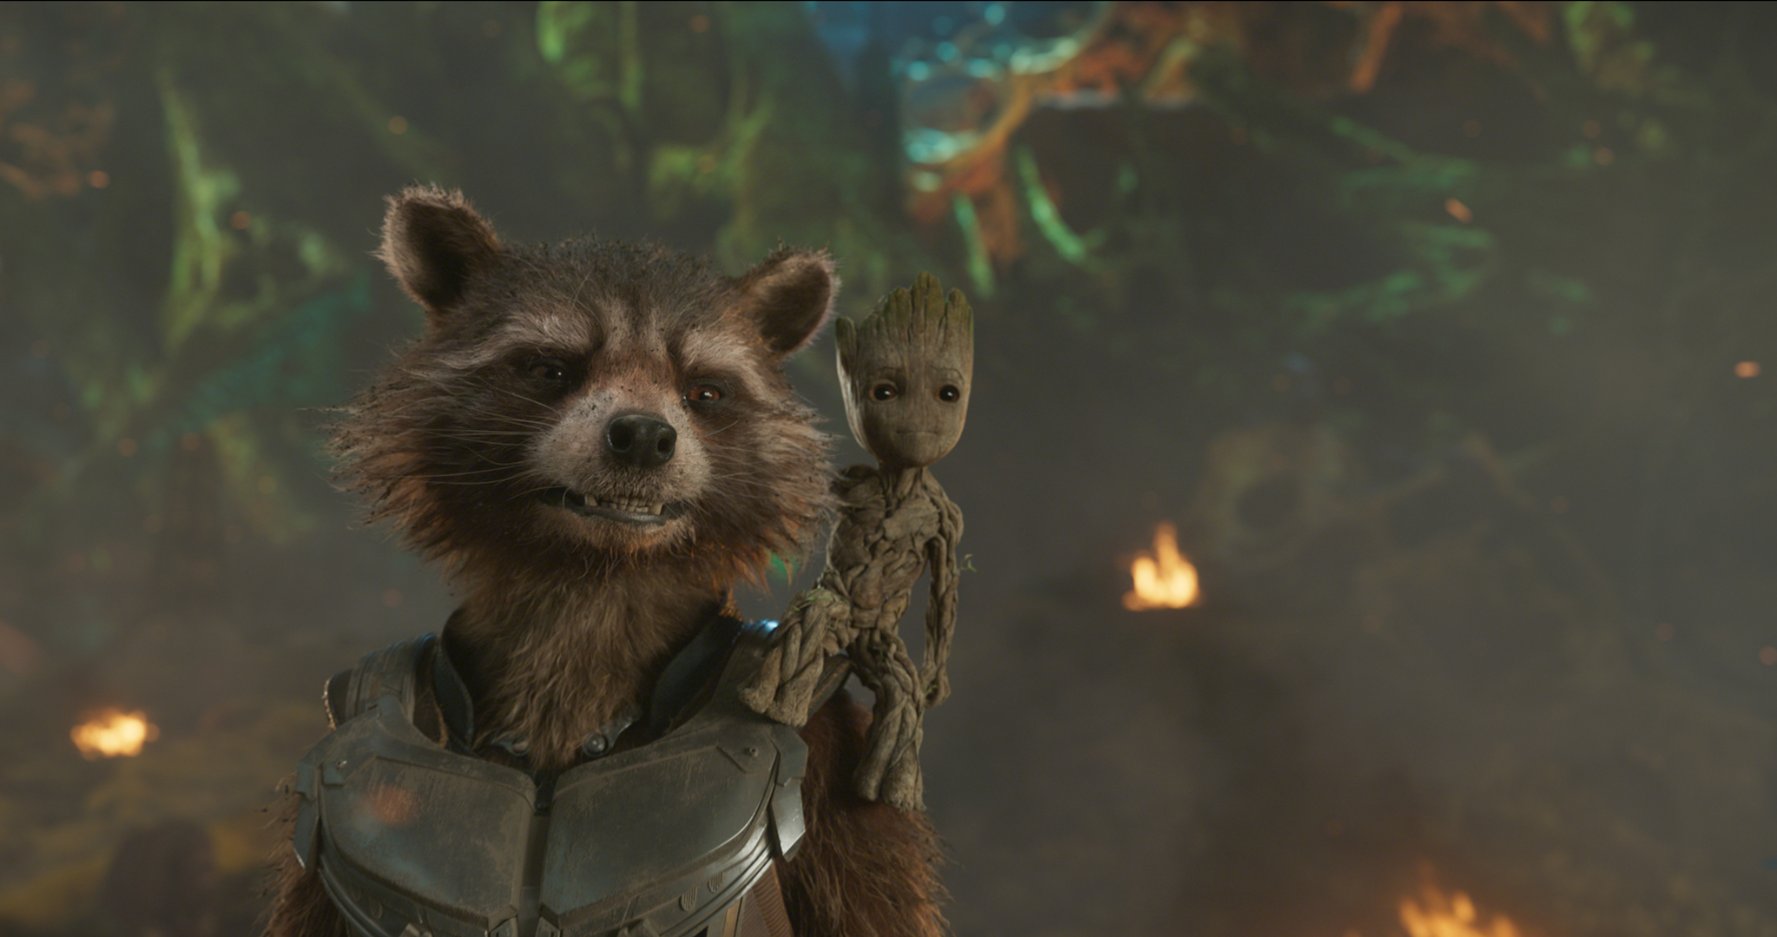 Guardians of the Galaxy Vol. 2 a mixture of action and humor « Celebrity Gossip and Movie News